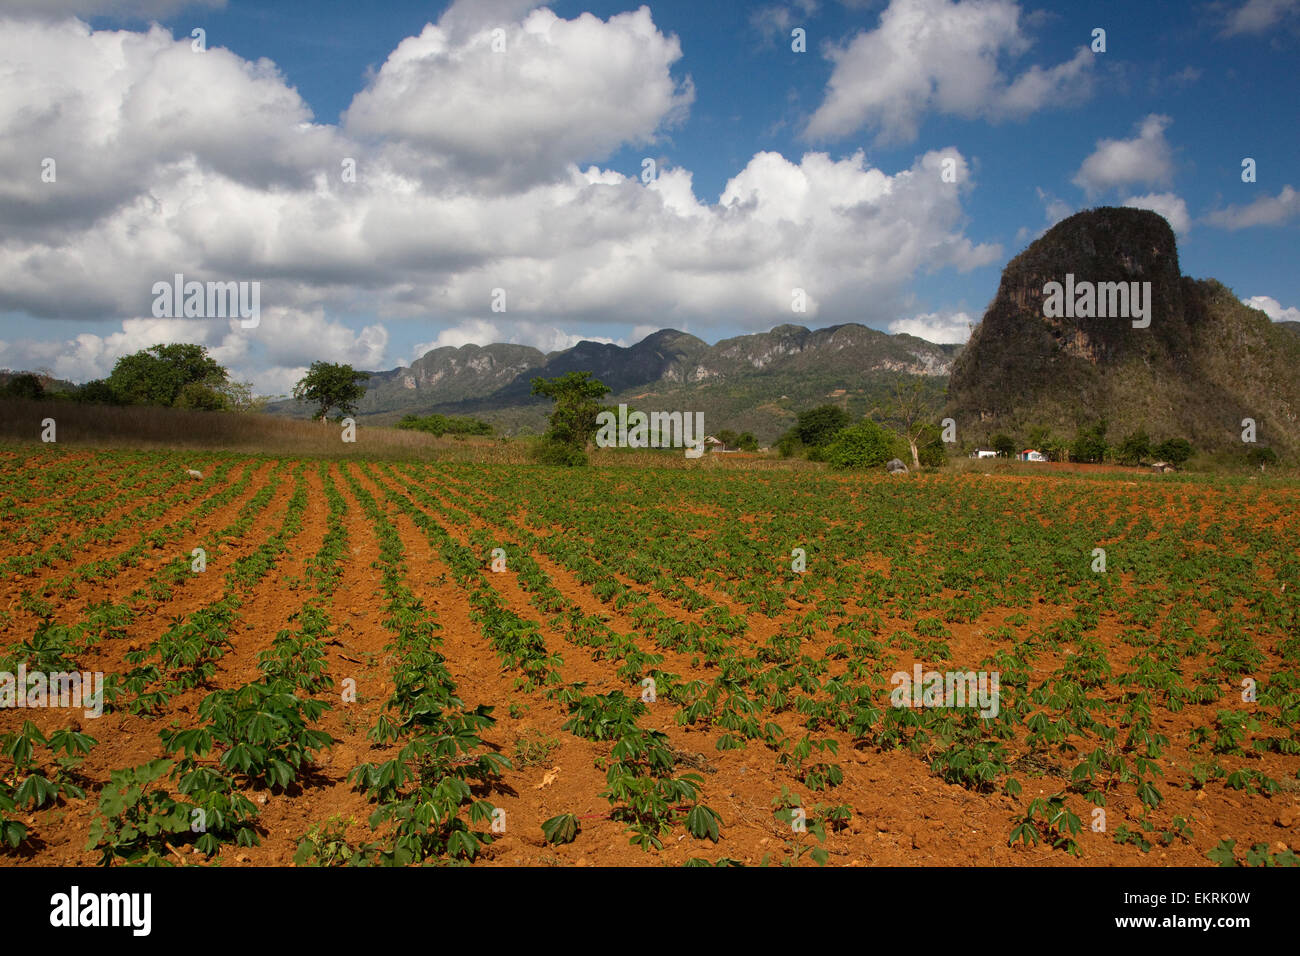 Agricultural land in Vinales, Cuba with crops and tobacco plantations Stock Photo